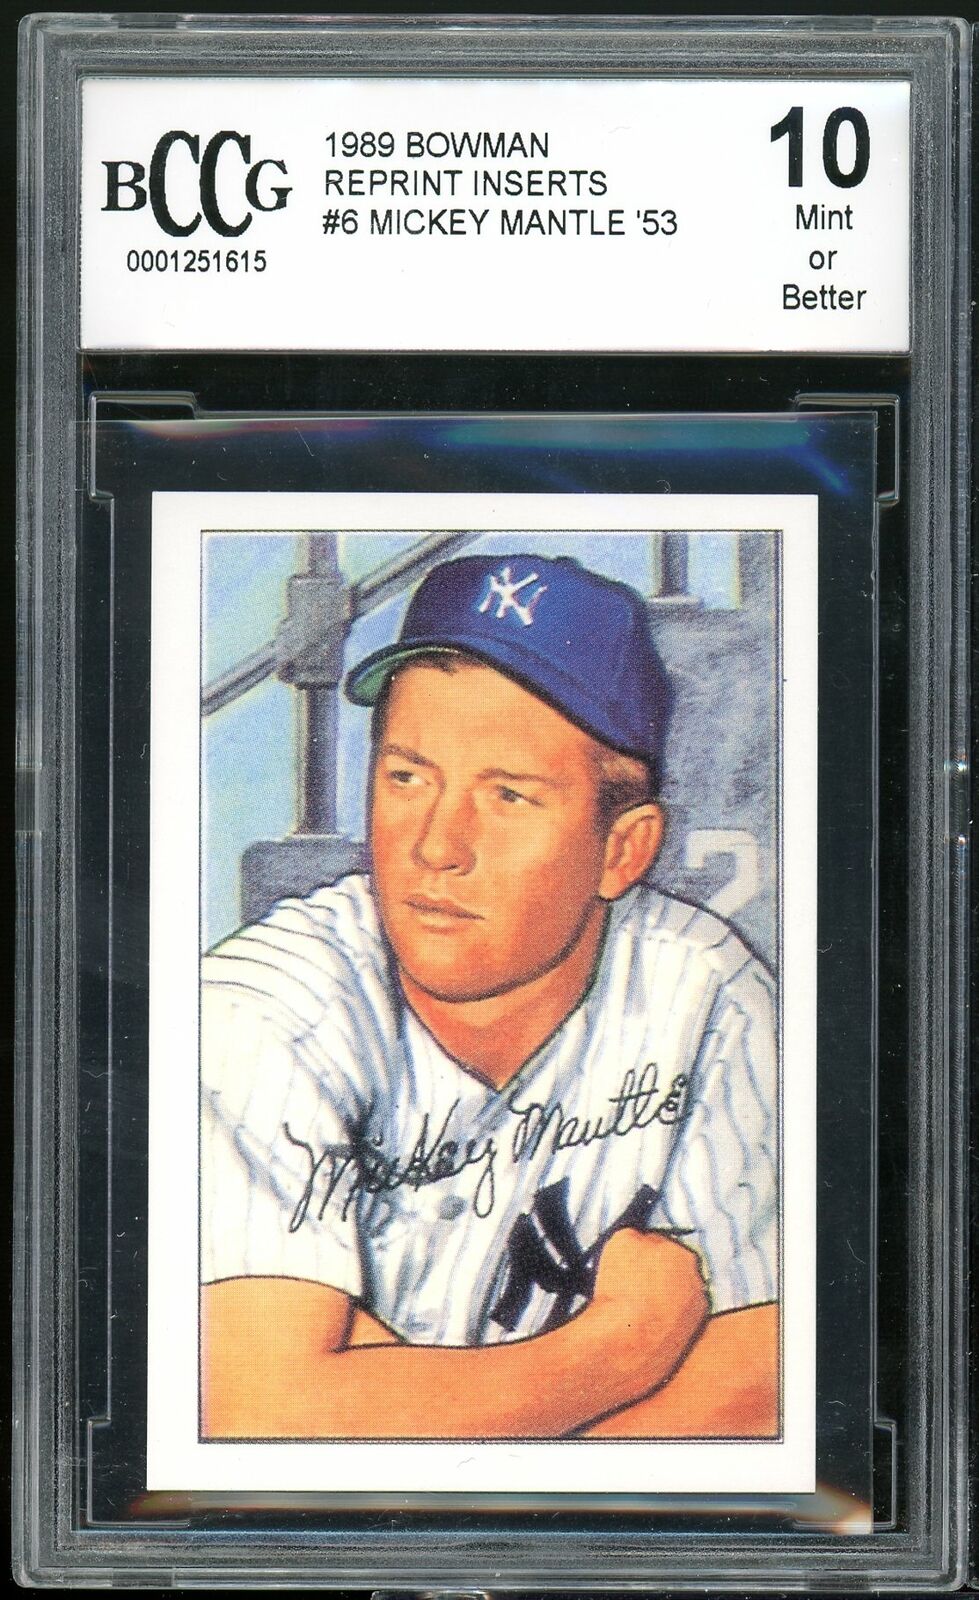 1989 Bowman Reprint Inserts #6 Mickey Mantle '53 Card BGS BCCG 10 Mint+ Image 1